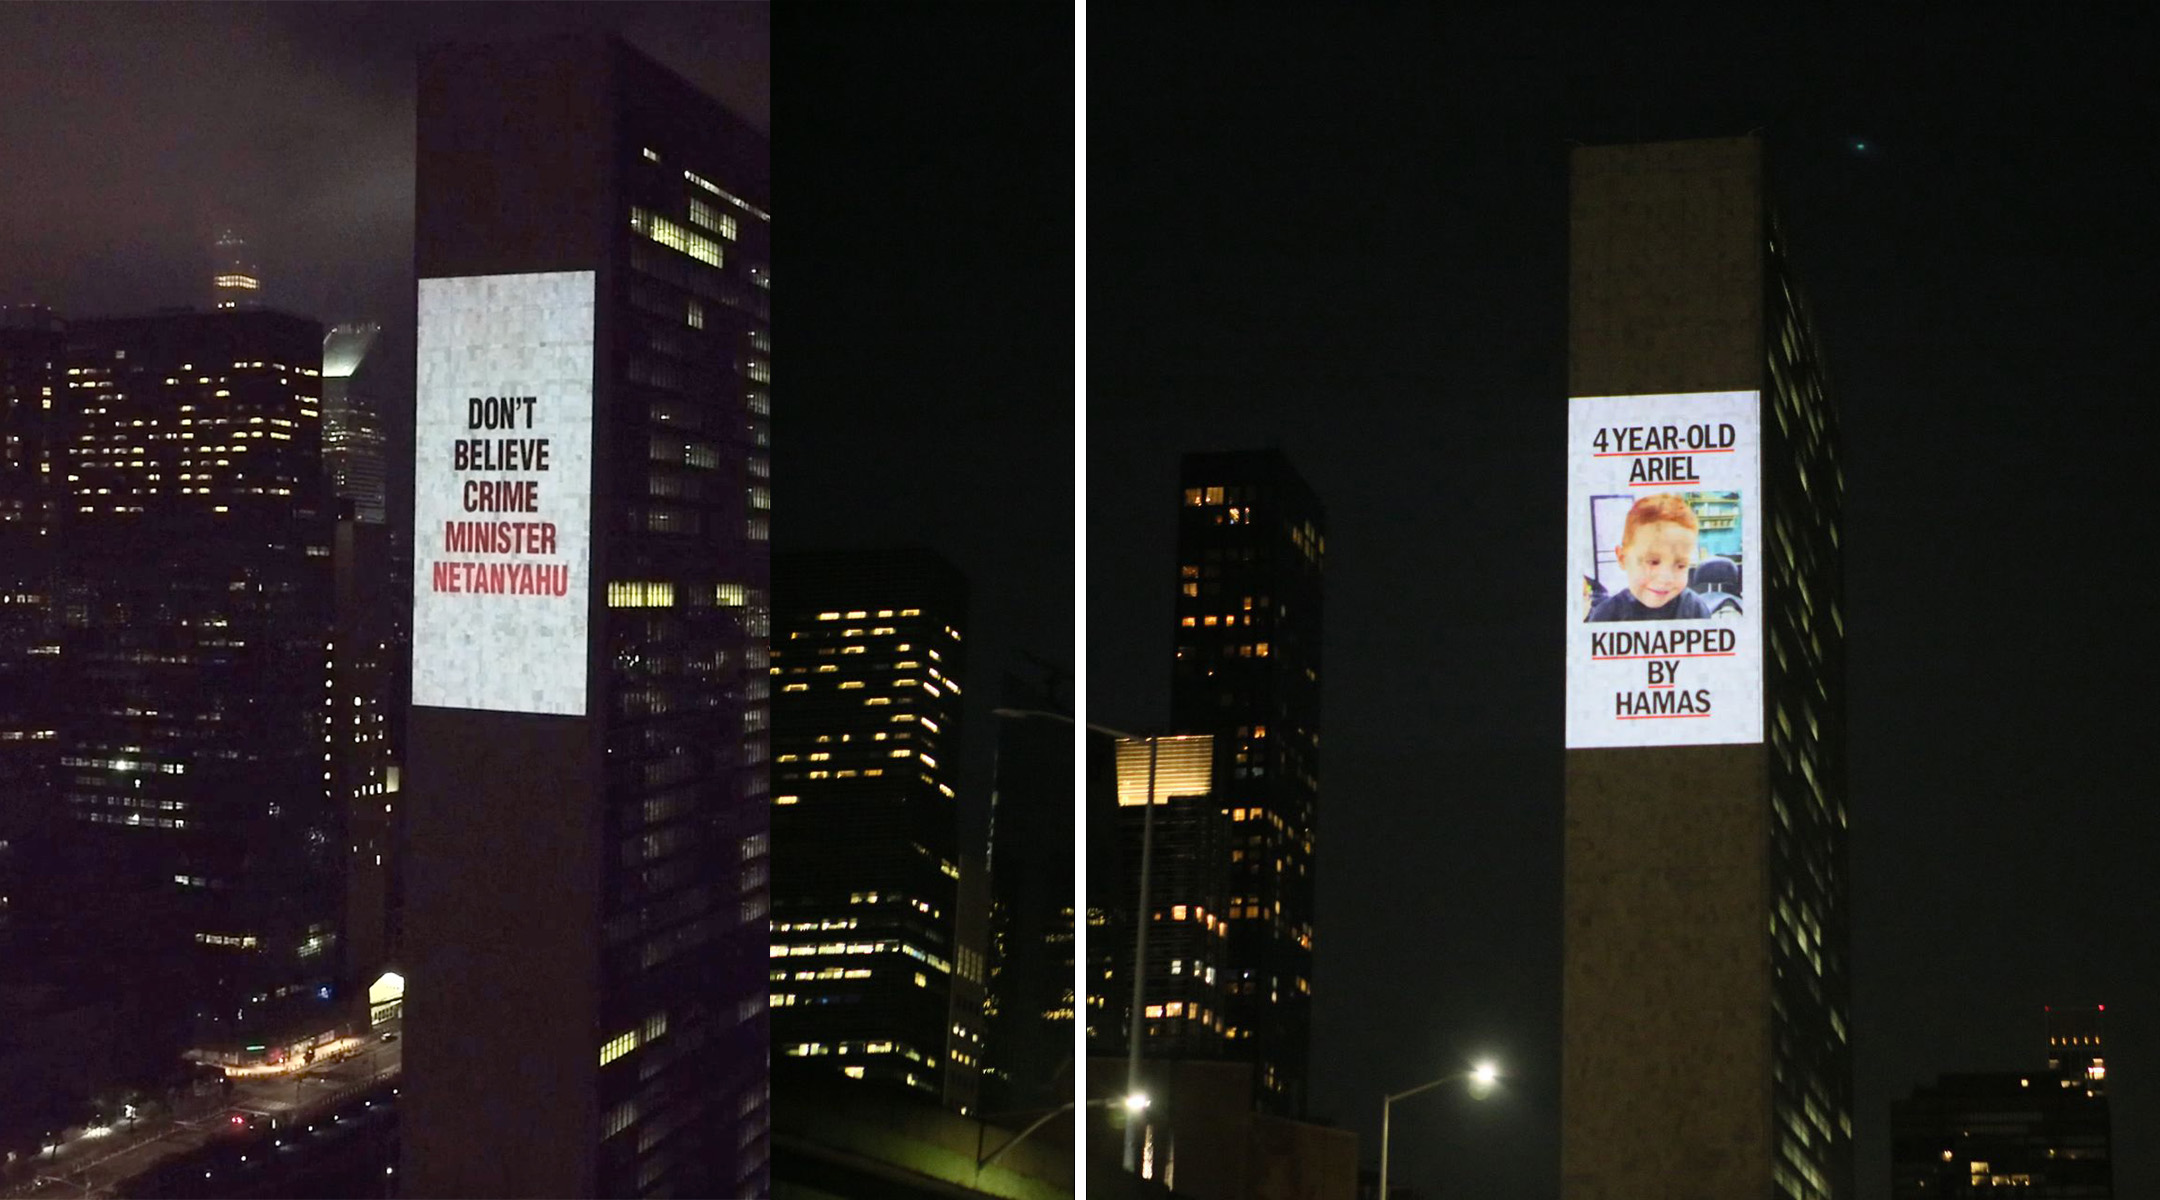 Left: A message against Israeli Prime Minister Benjamin Netanyahu is projected onto UN Headquarters ahead of his appearance at the UN General Assembly in September 2023. Right: An image of a kidnapped Israeli boy is projected onto UN Headquarters after Hamas' attack on Israel in October 2023. (Courtesy)